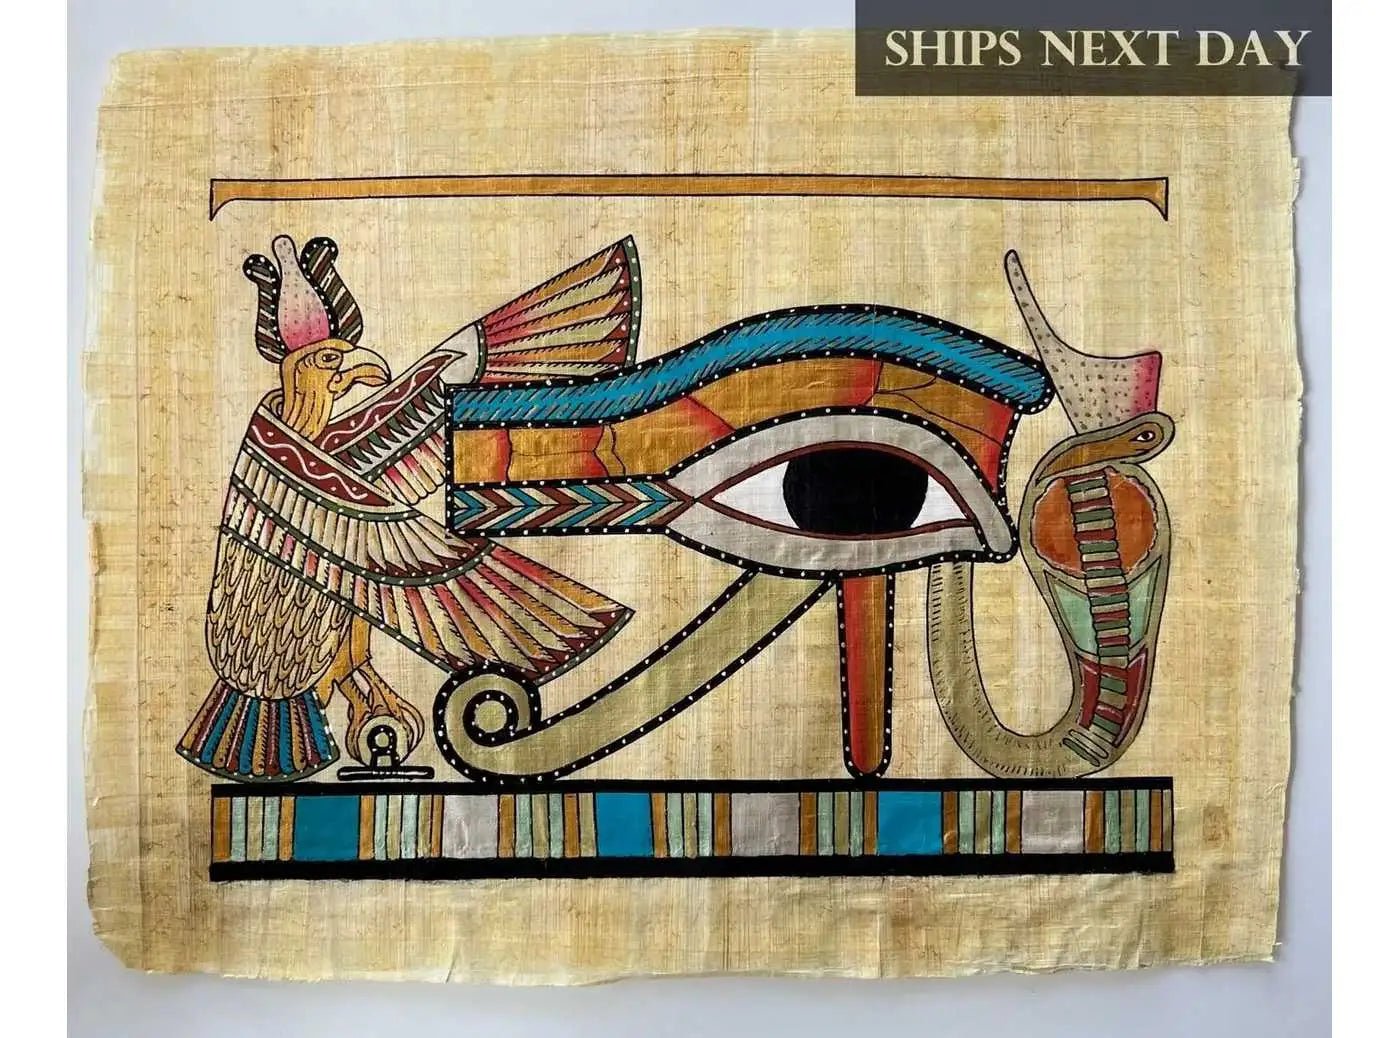 Eye Of Horus - Papyrus Painting - Authentic Papyrus Art of Ancient Egypt - Egypt Decor - V2